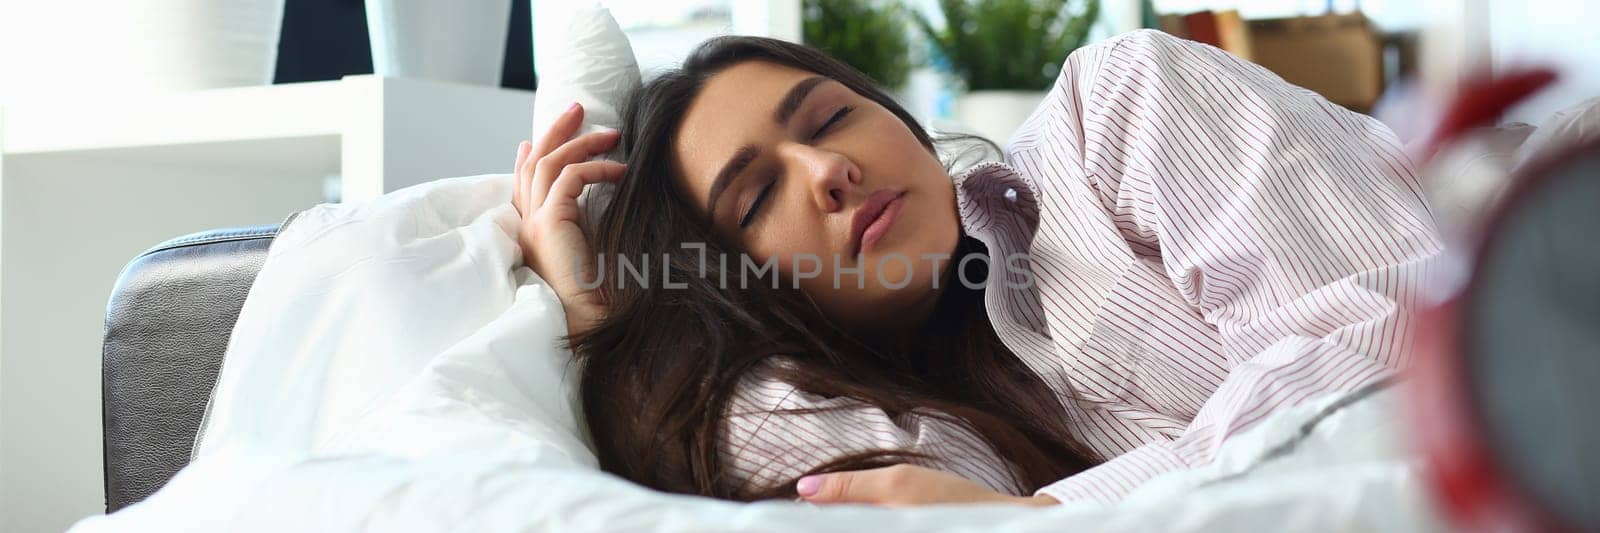 Sleepy woman with closed eyes dreaming about future vacation or sleeping in the bedroom. Feeling calm in dream concept